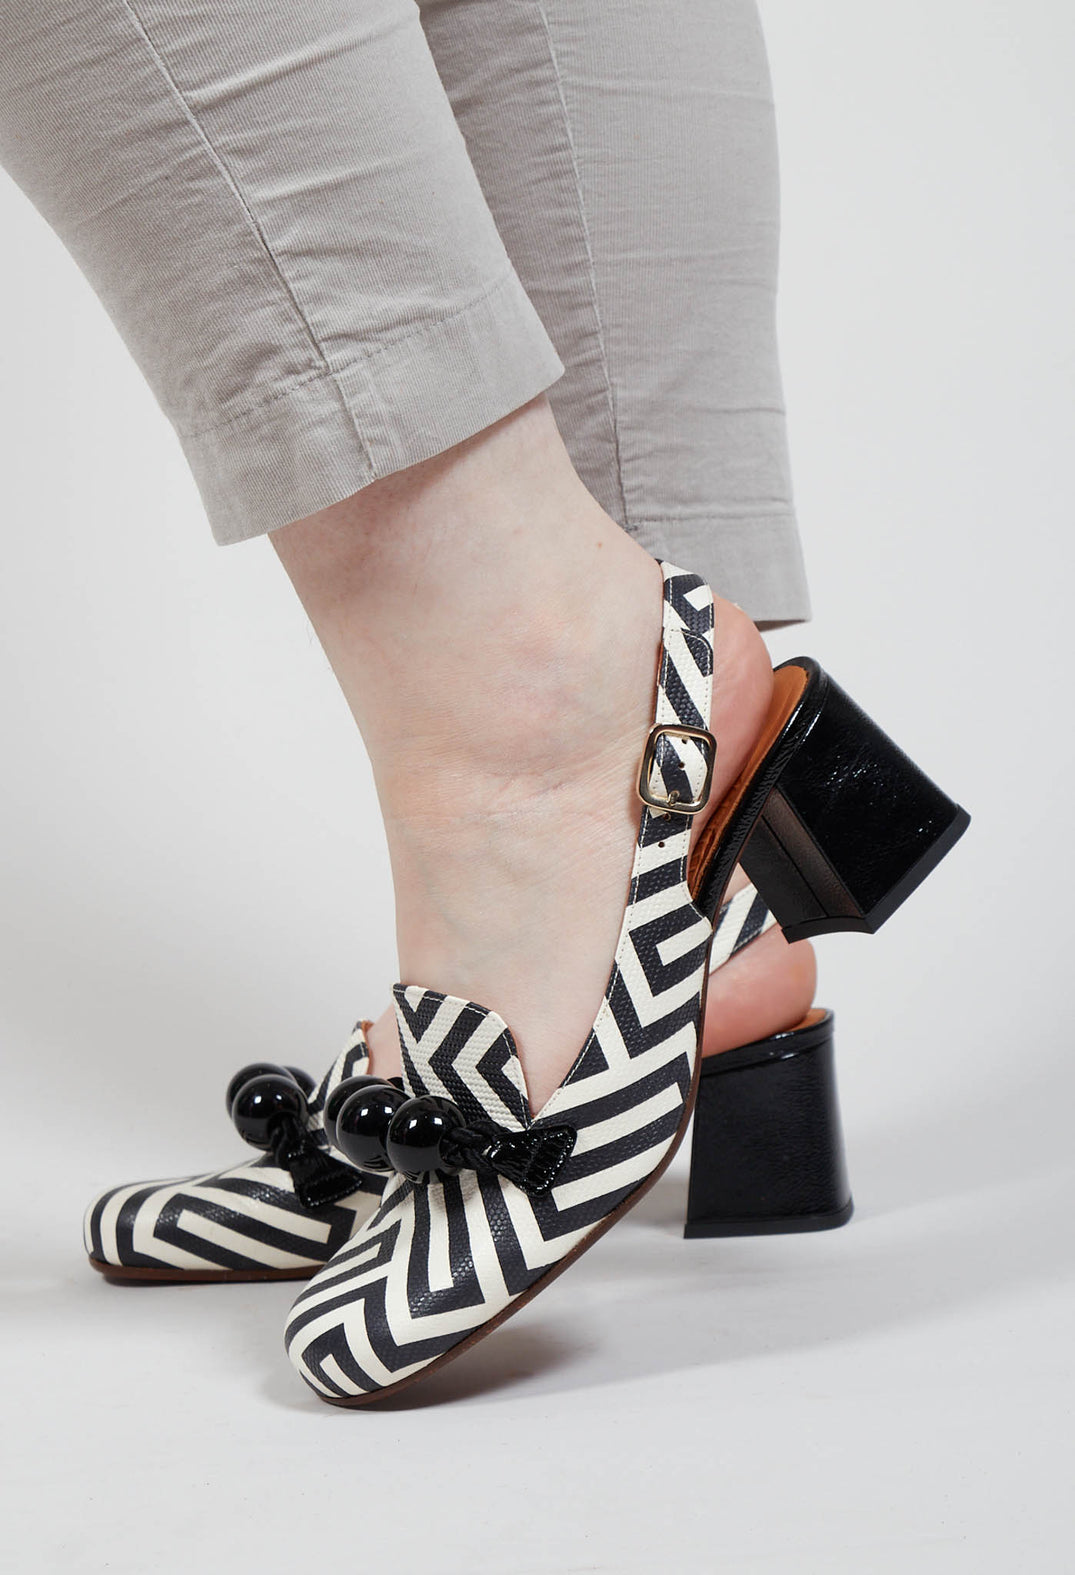 Moby Slingback Heel in Black and White